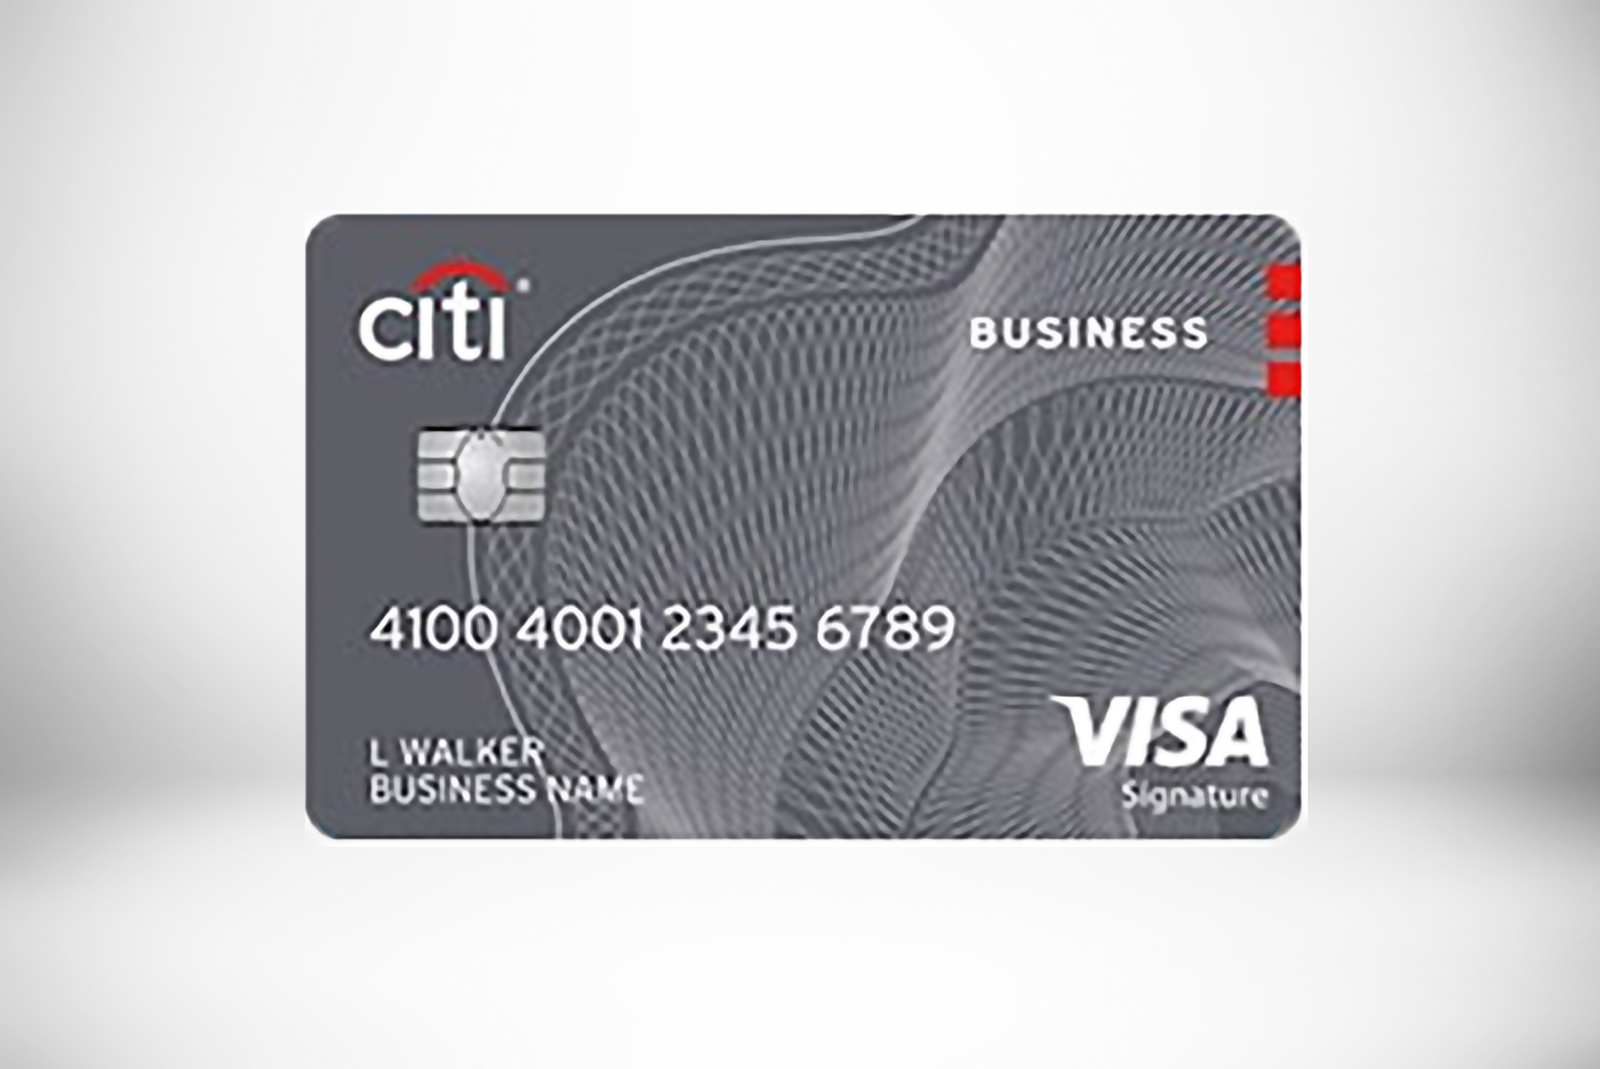 Top Business Credit Cards / How Many Credit Cards Should You Have Thrifty Millionaire : Business credit cards offer a variety of benefits versus personal credit cards: